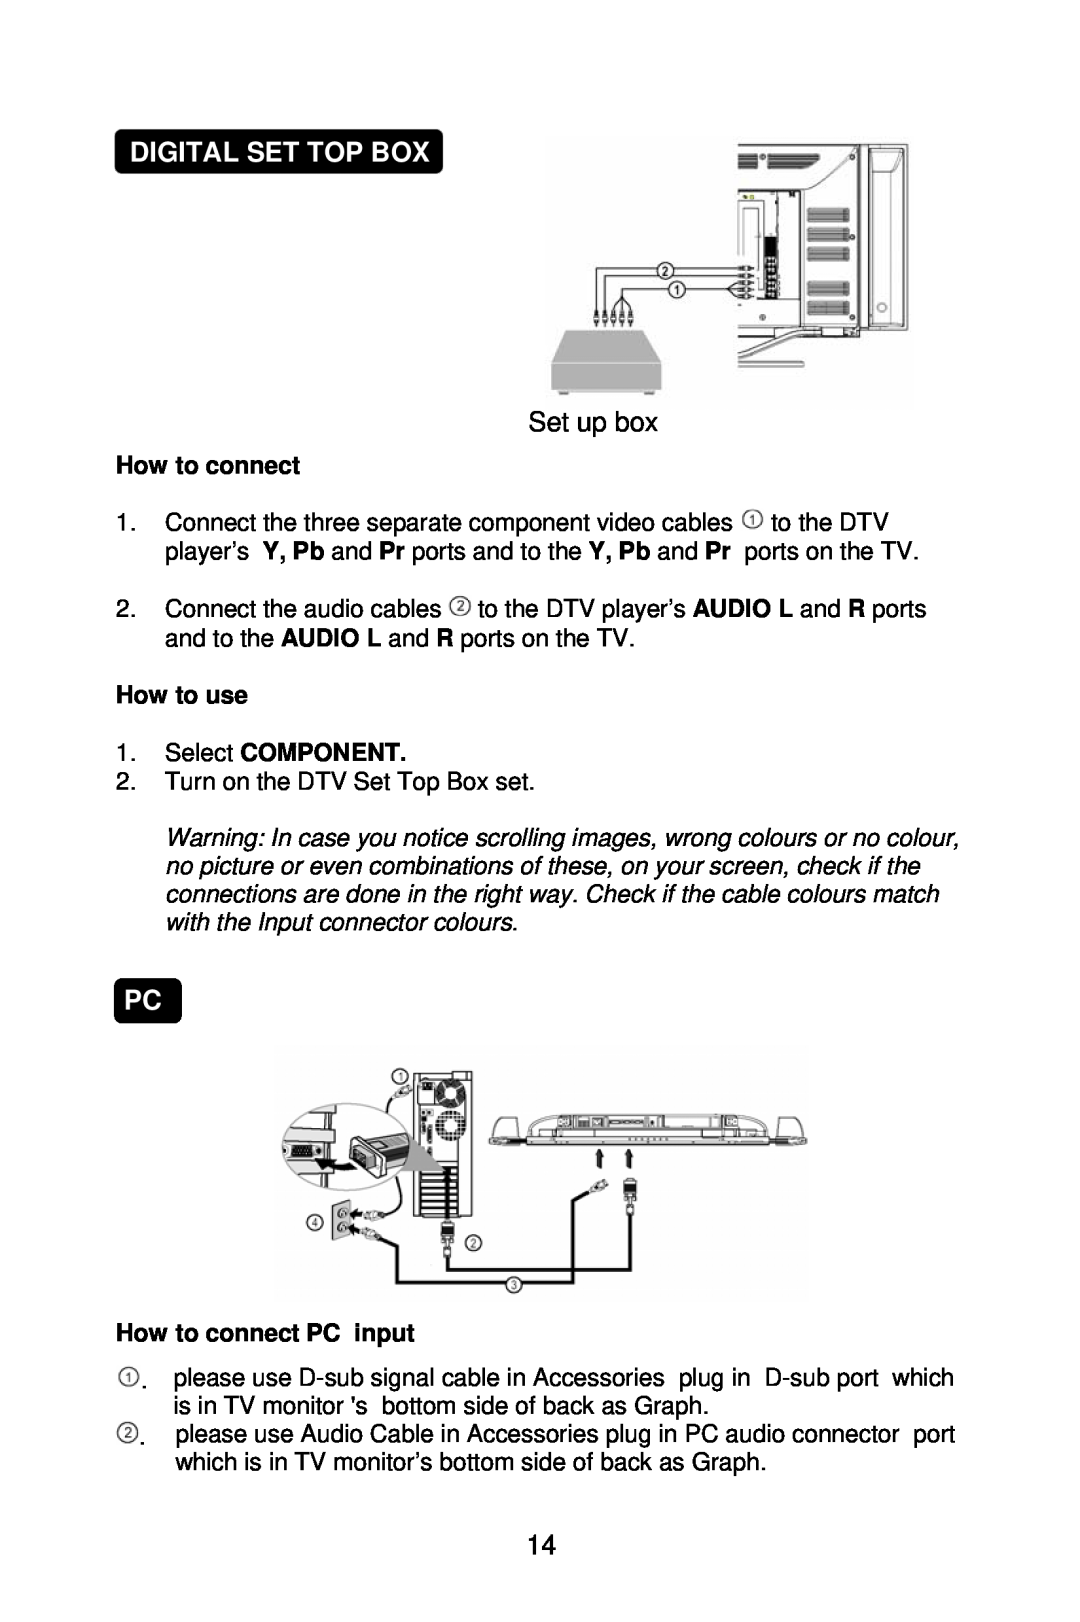 Mitsubishi Electronics DV321 Digital Set Top Box, Set up box, How to connect PC input, How to use 1. Select COMPONENT 